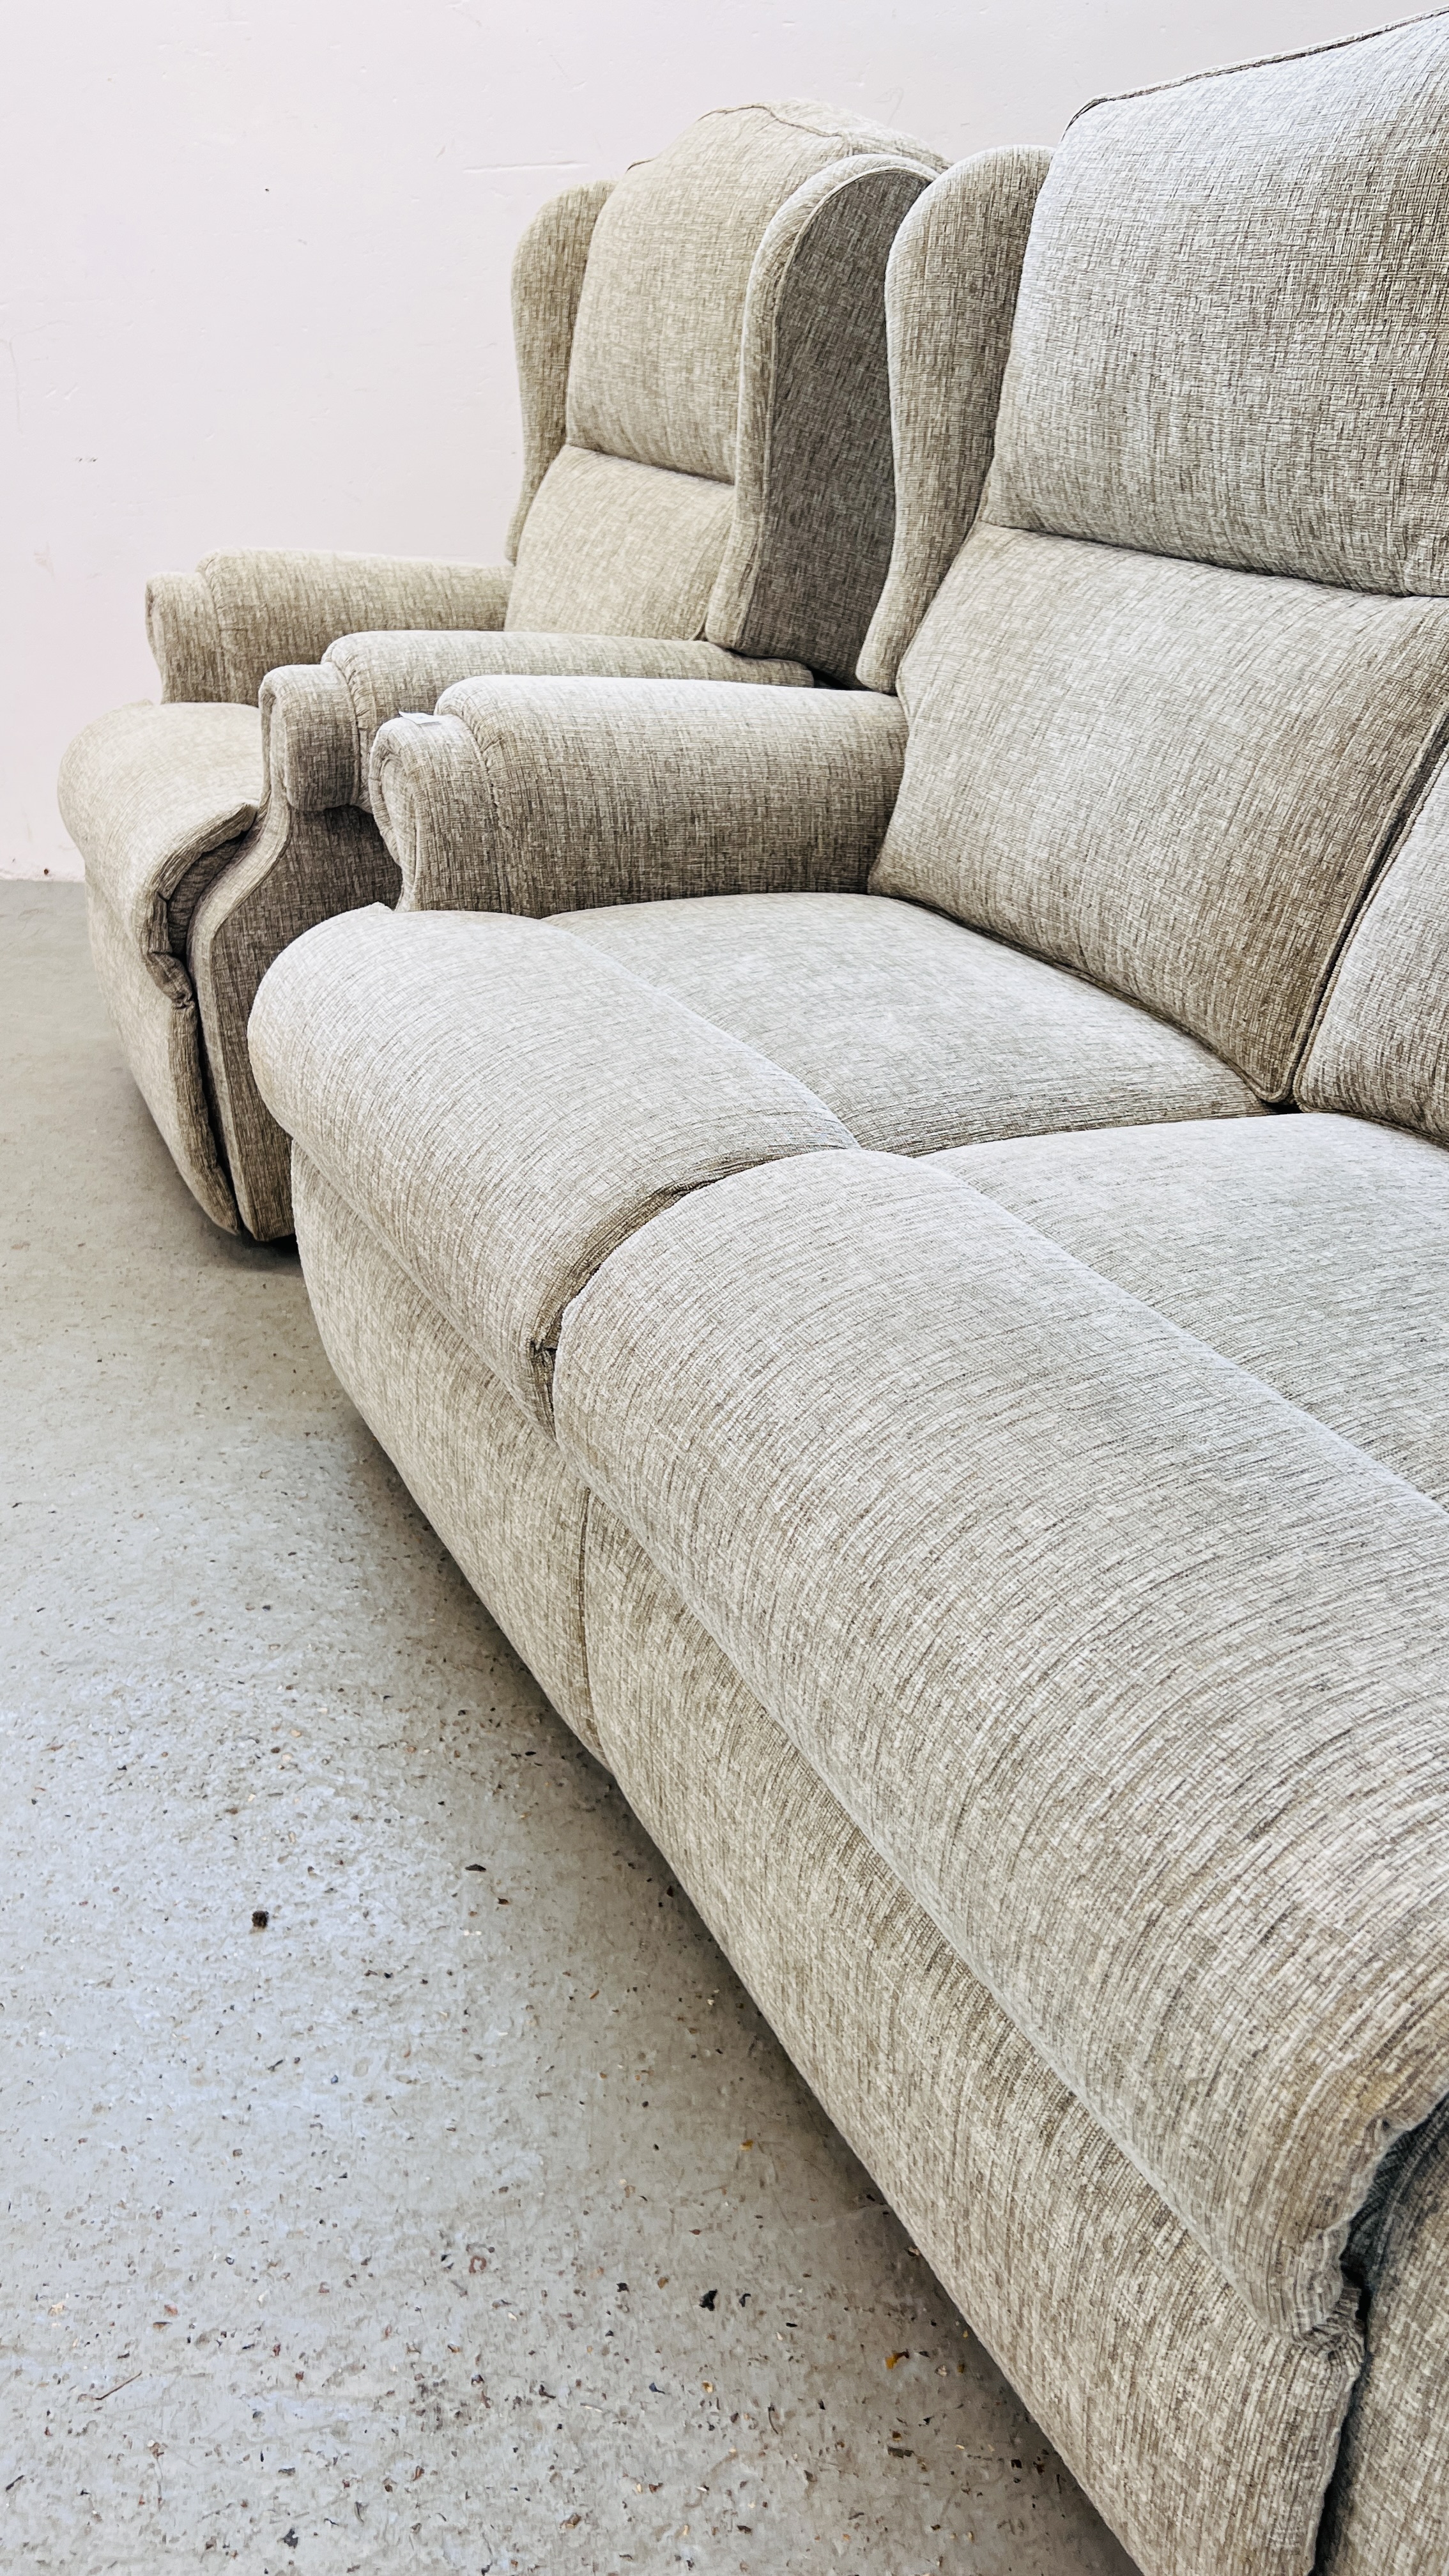 A GOOD QUALITY "SHERBORNE" TWO SEATER SOFA W 140CM X D 82CM X H 94CM ALONG WITH A MATCHING ARMCHAIR. - Image 7 of 14